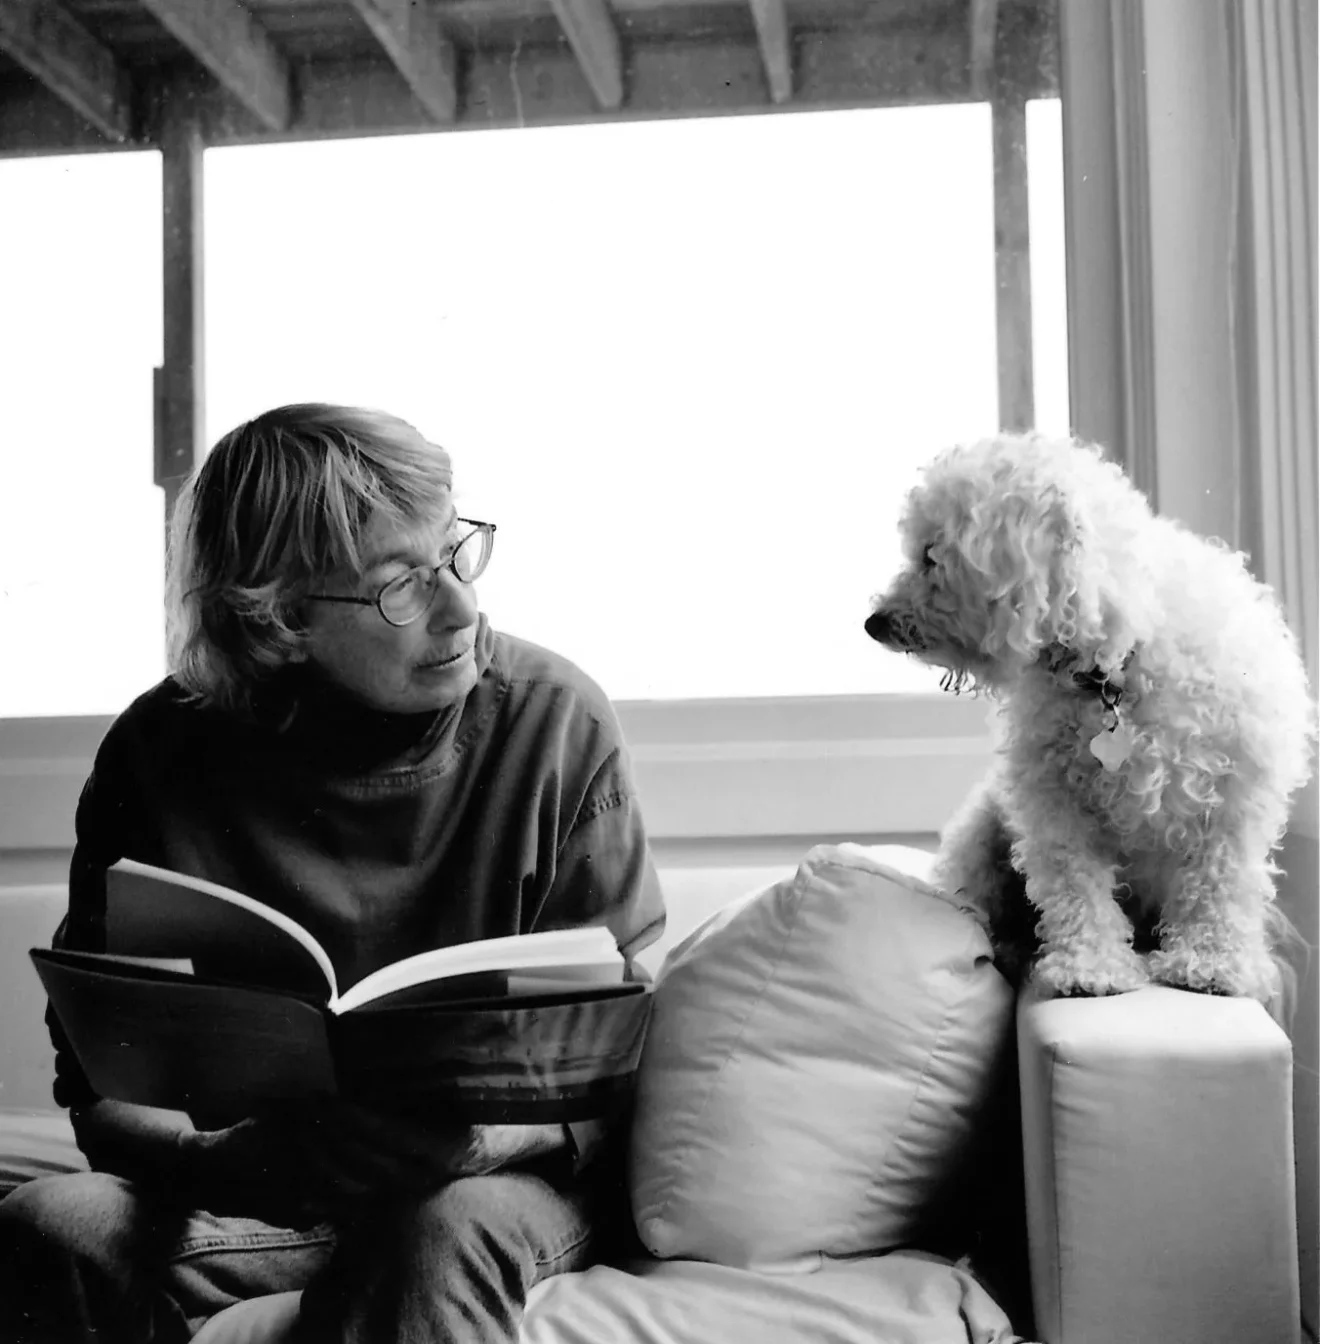 Ordinary Heroes:  The Poet - Mary Oliver